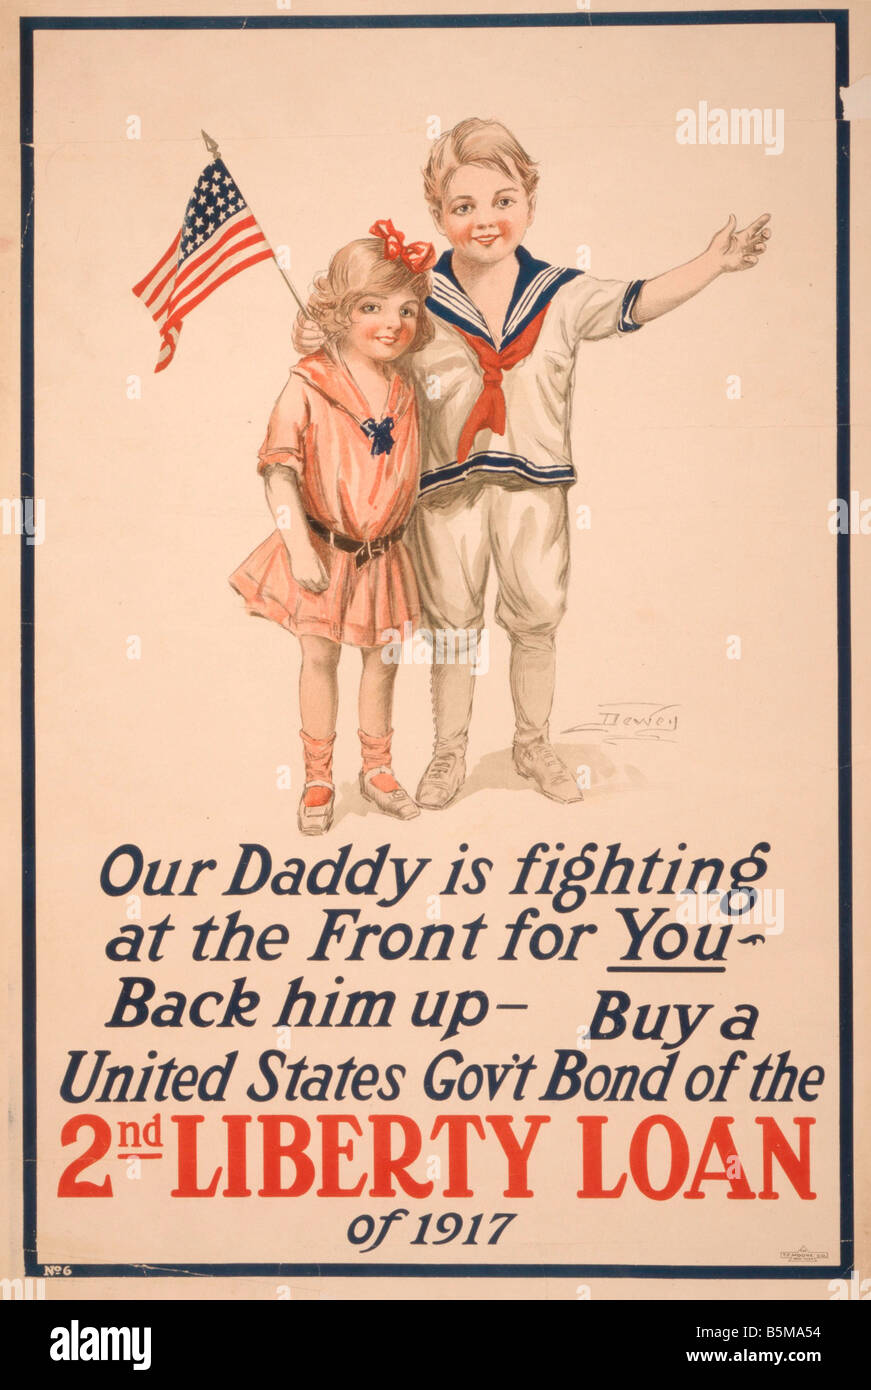 2 G55 P1 1917 59 WW I USA War Loan Poster 1917 History World War I Propaganda Our Daddy is fighting at the Front for You Back hi Stock Photo